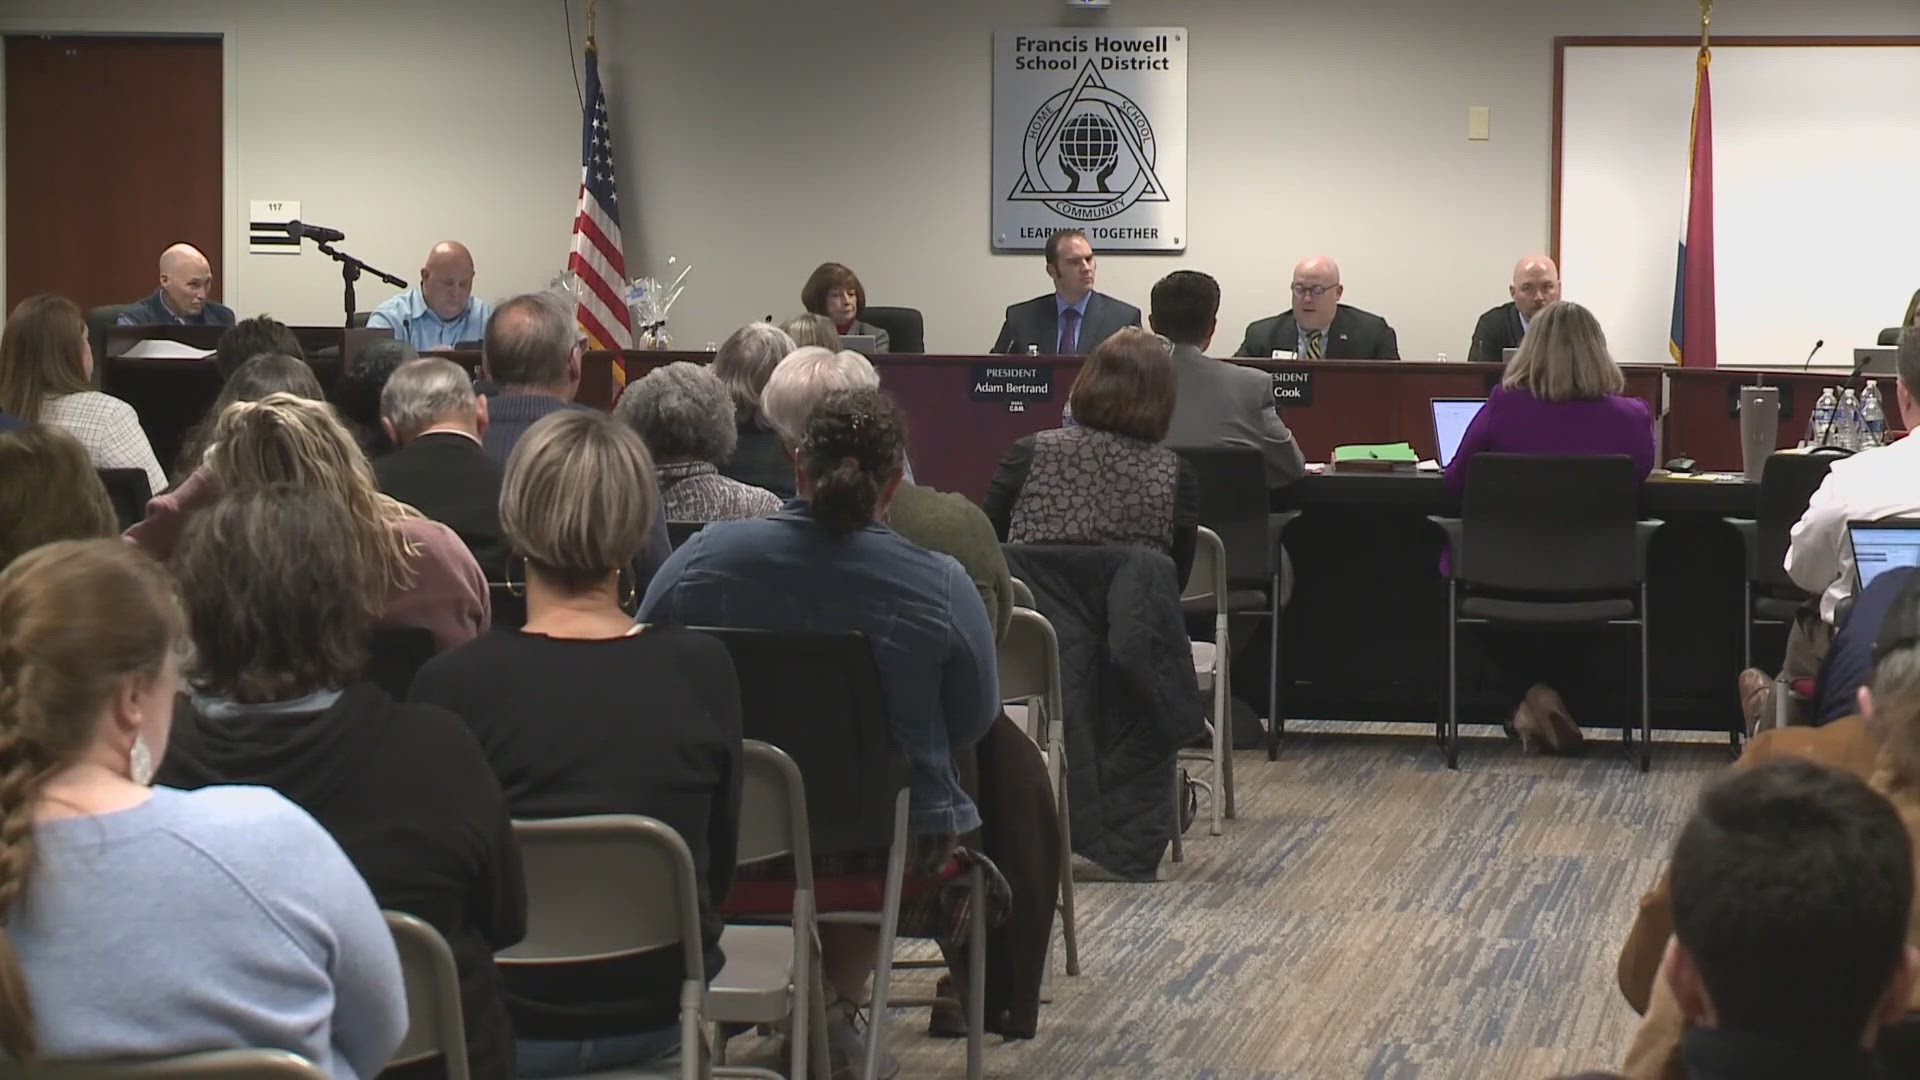 The school board voted Thursday to approve all of the new curriculum for next school year. The new curriculum includes restructured Black studies courses.